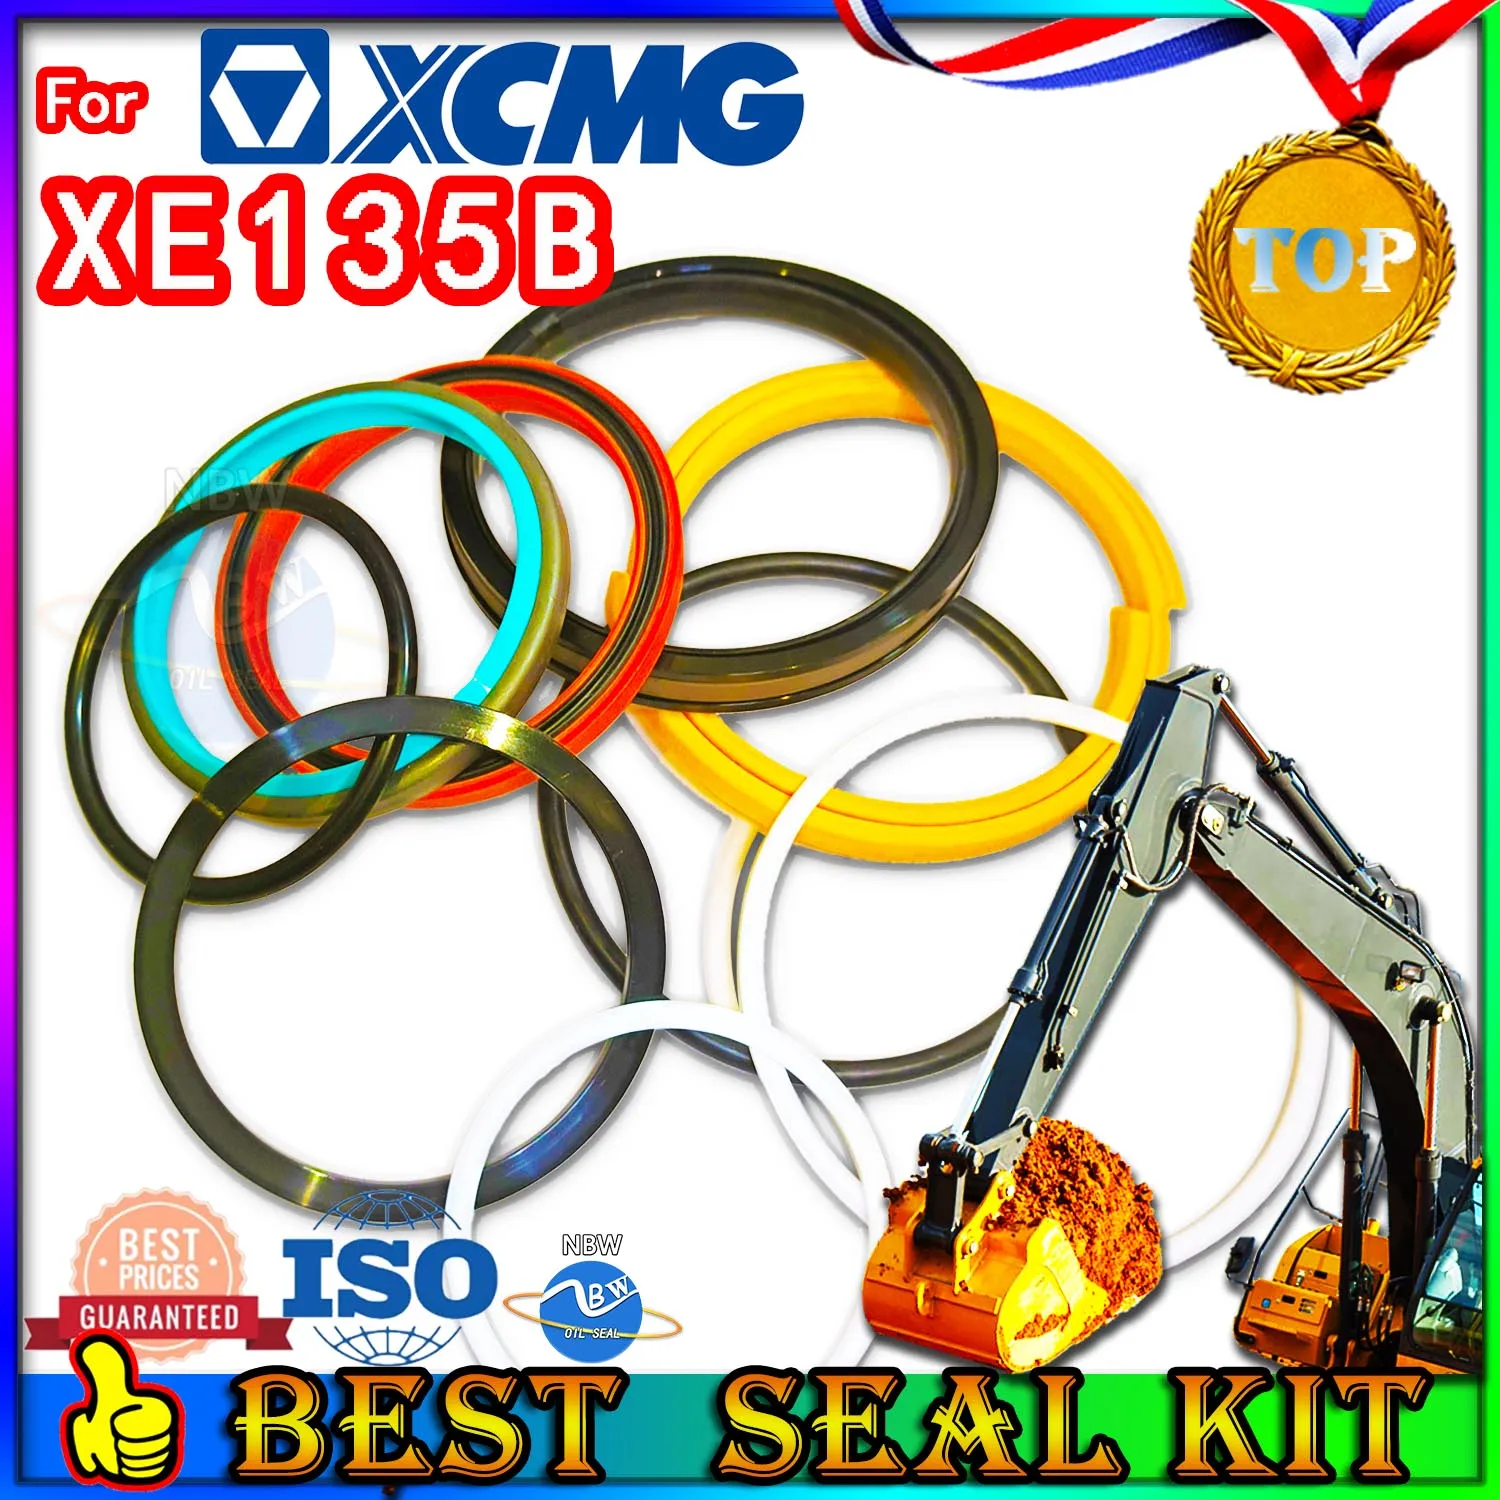 

For XCMG XE135B Oil Seal Repair Kit Boom Arm Bucket Excavator Hydraulic Cylinder Best Reliable Mend proof Center Swivel Pilot